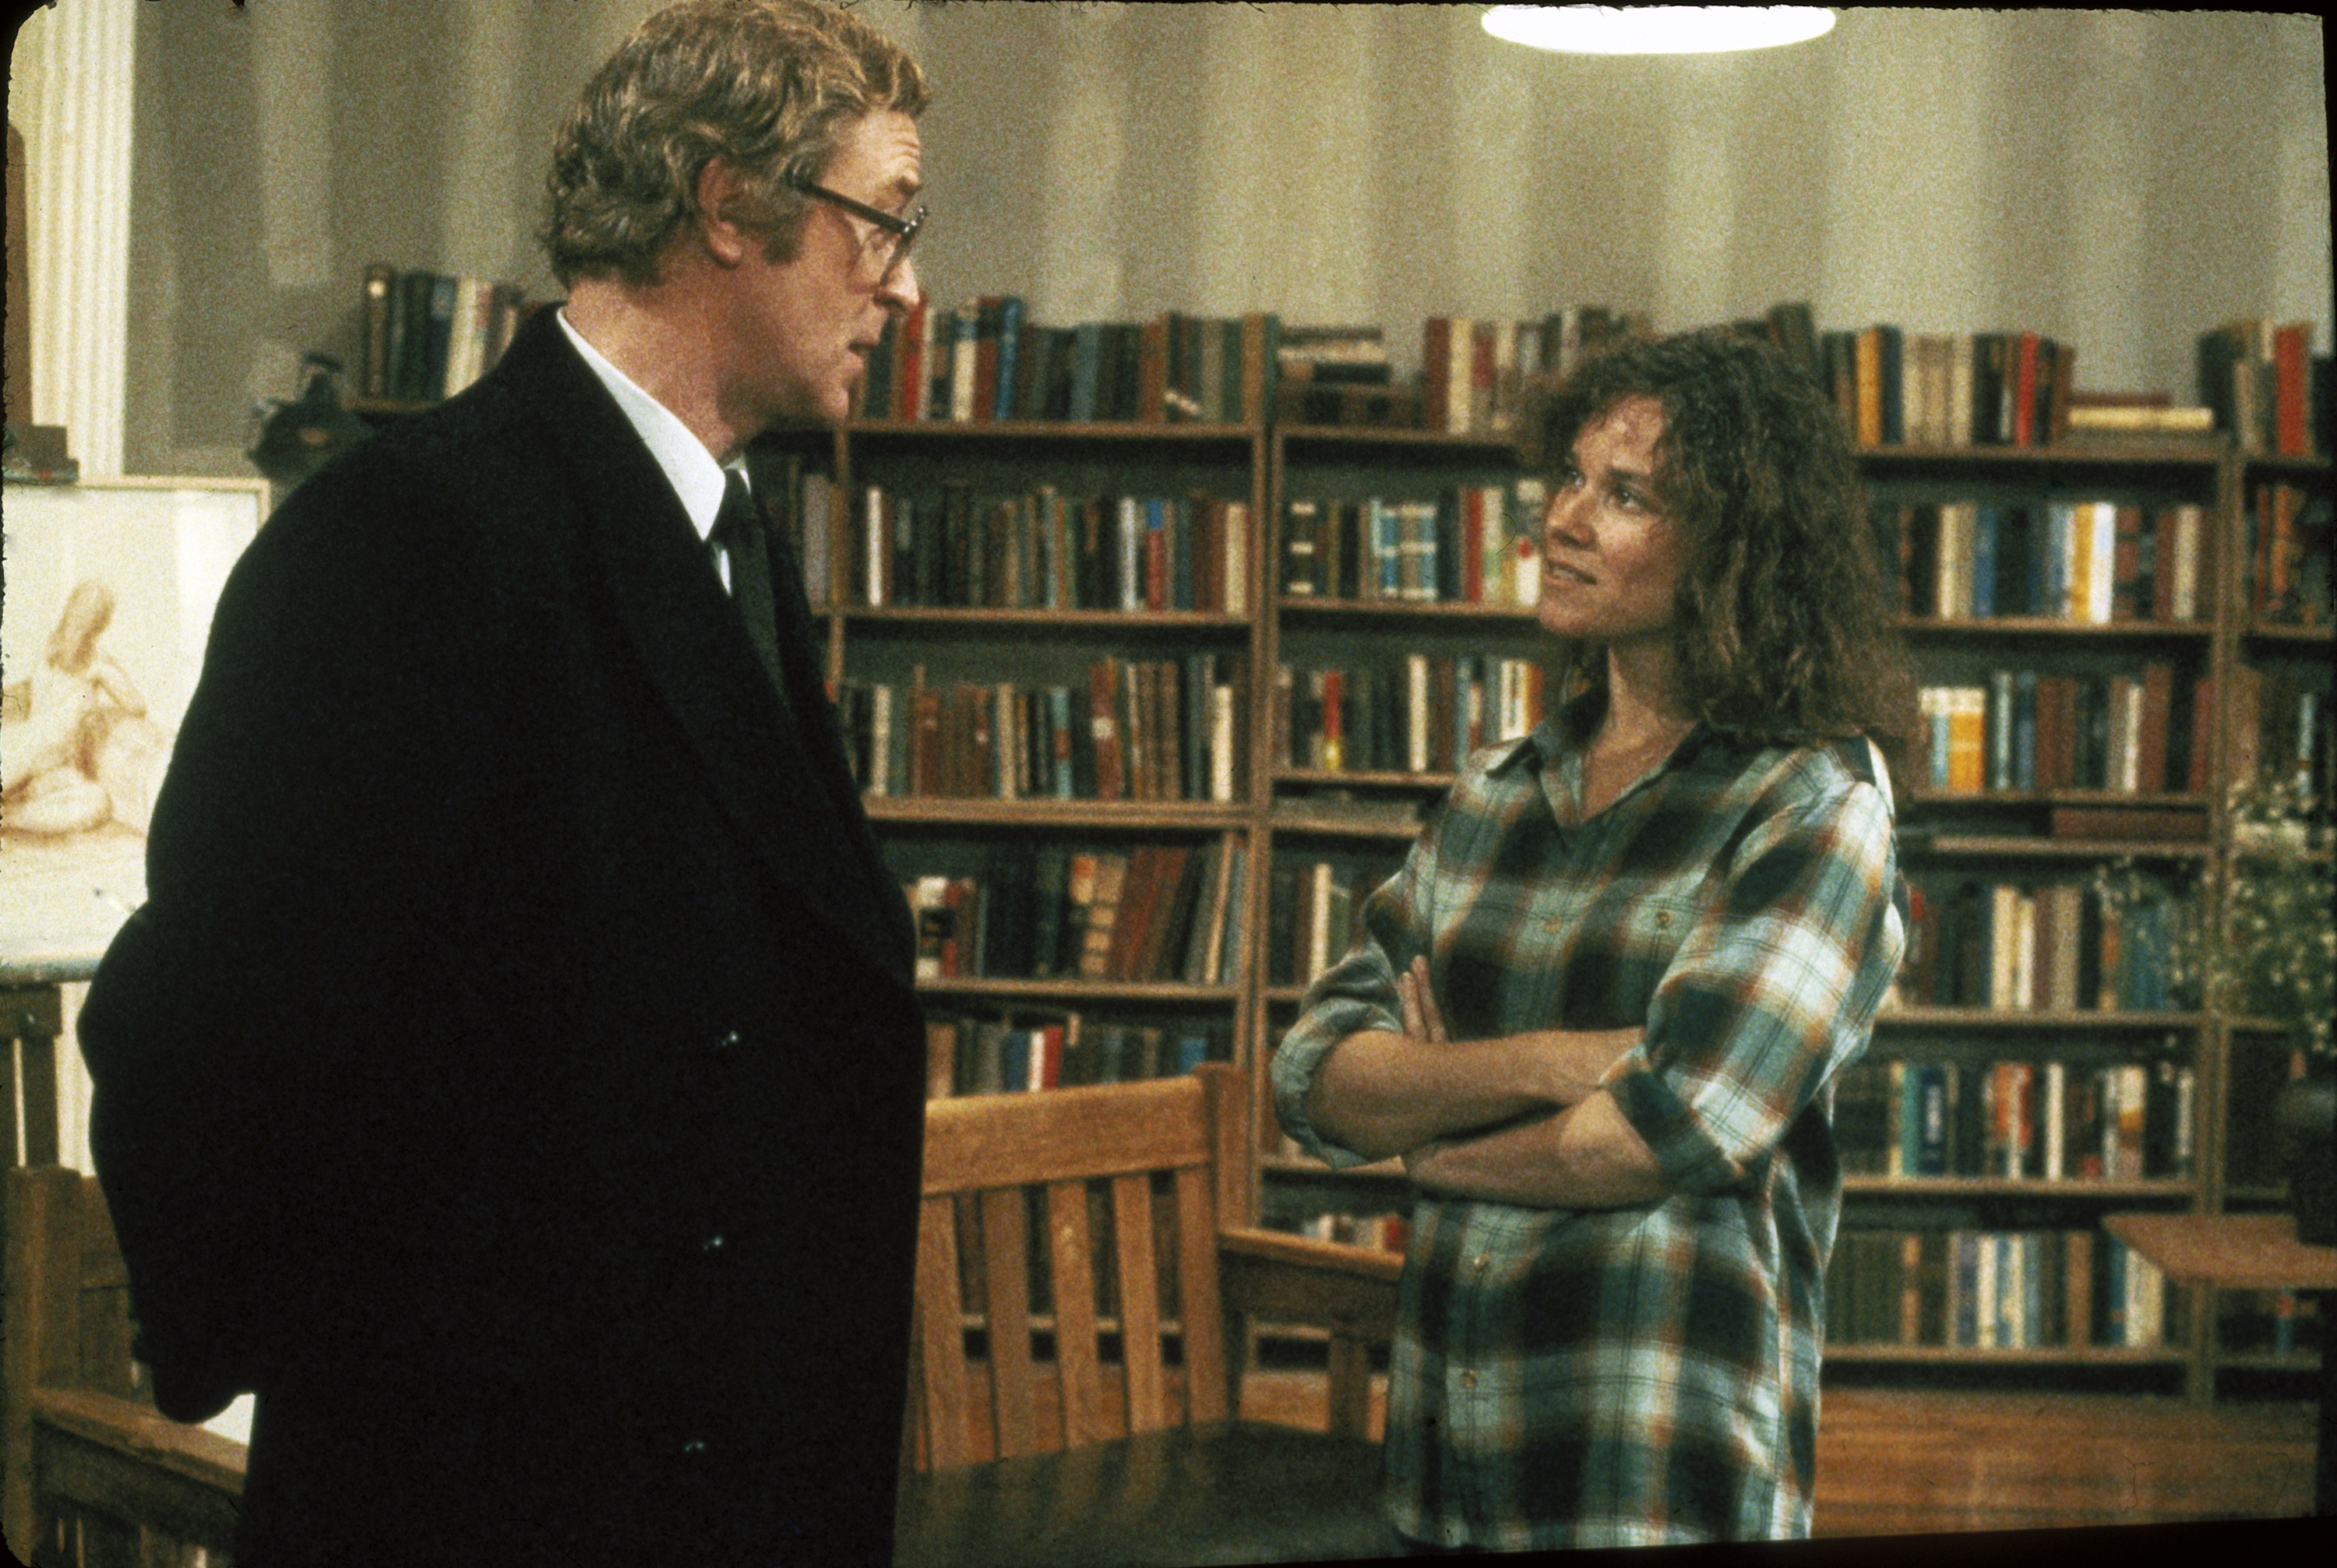 woody allen hannah and her sisters soundtrack torrent